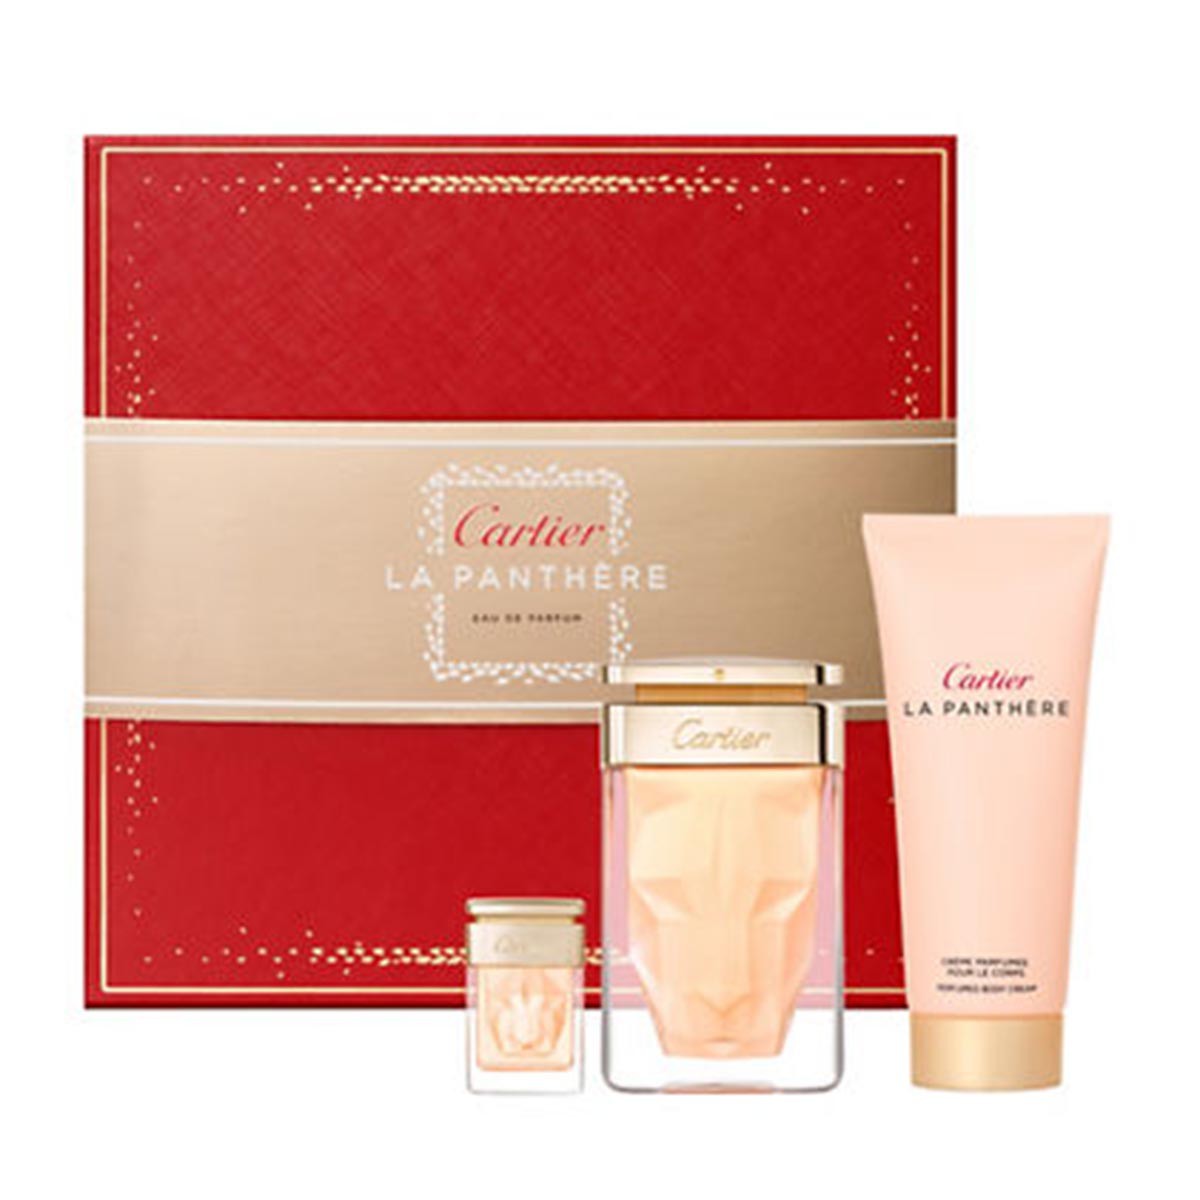 Cartier La Panthere EDP Gift Set for Women